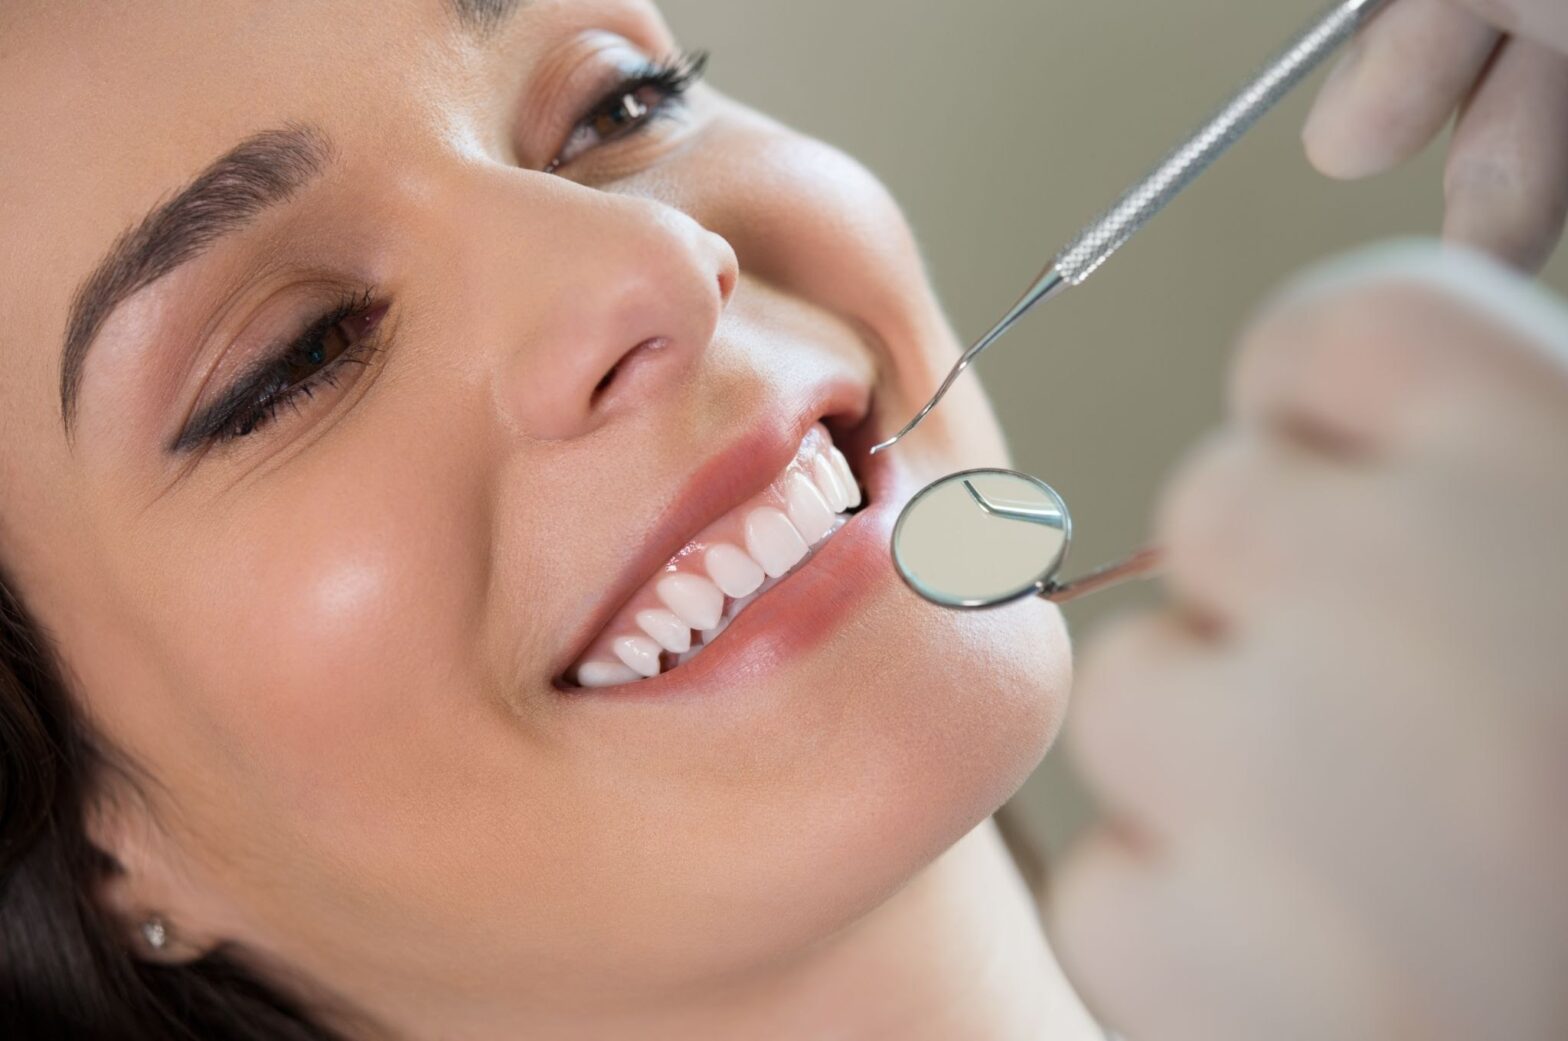 Are Dentists Trained To Do Hygienist Work?